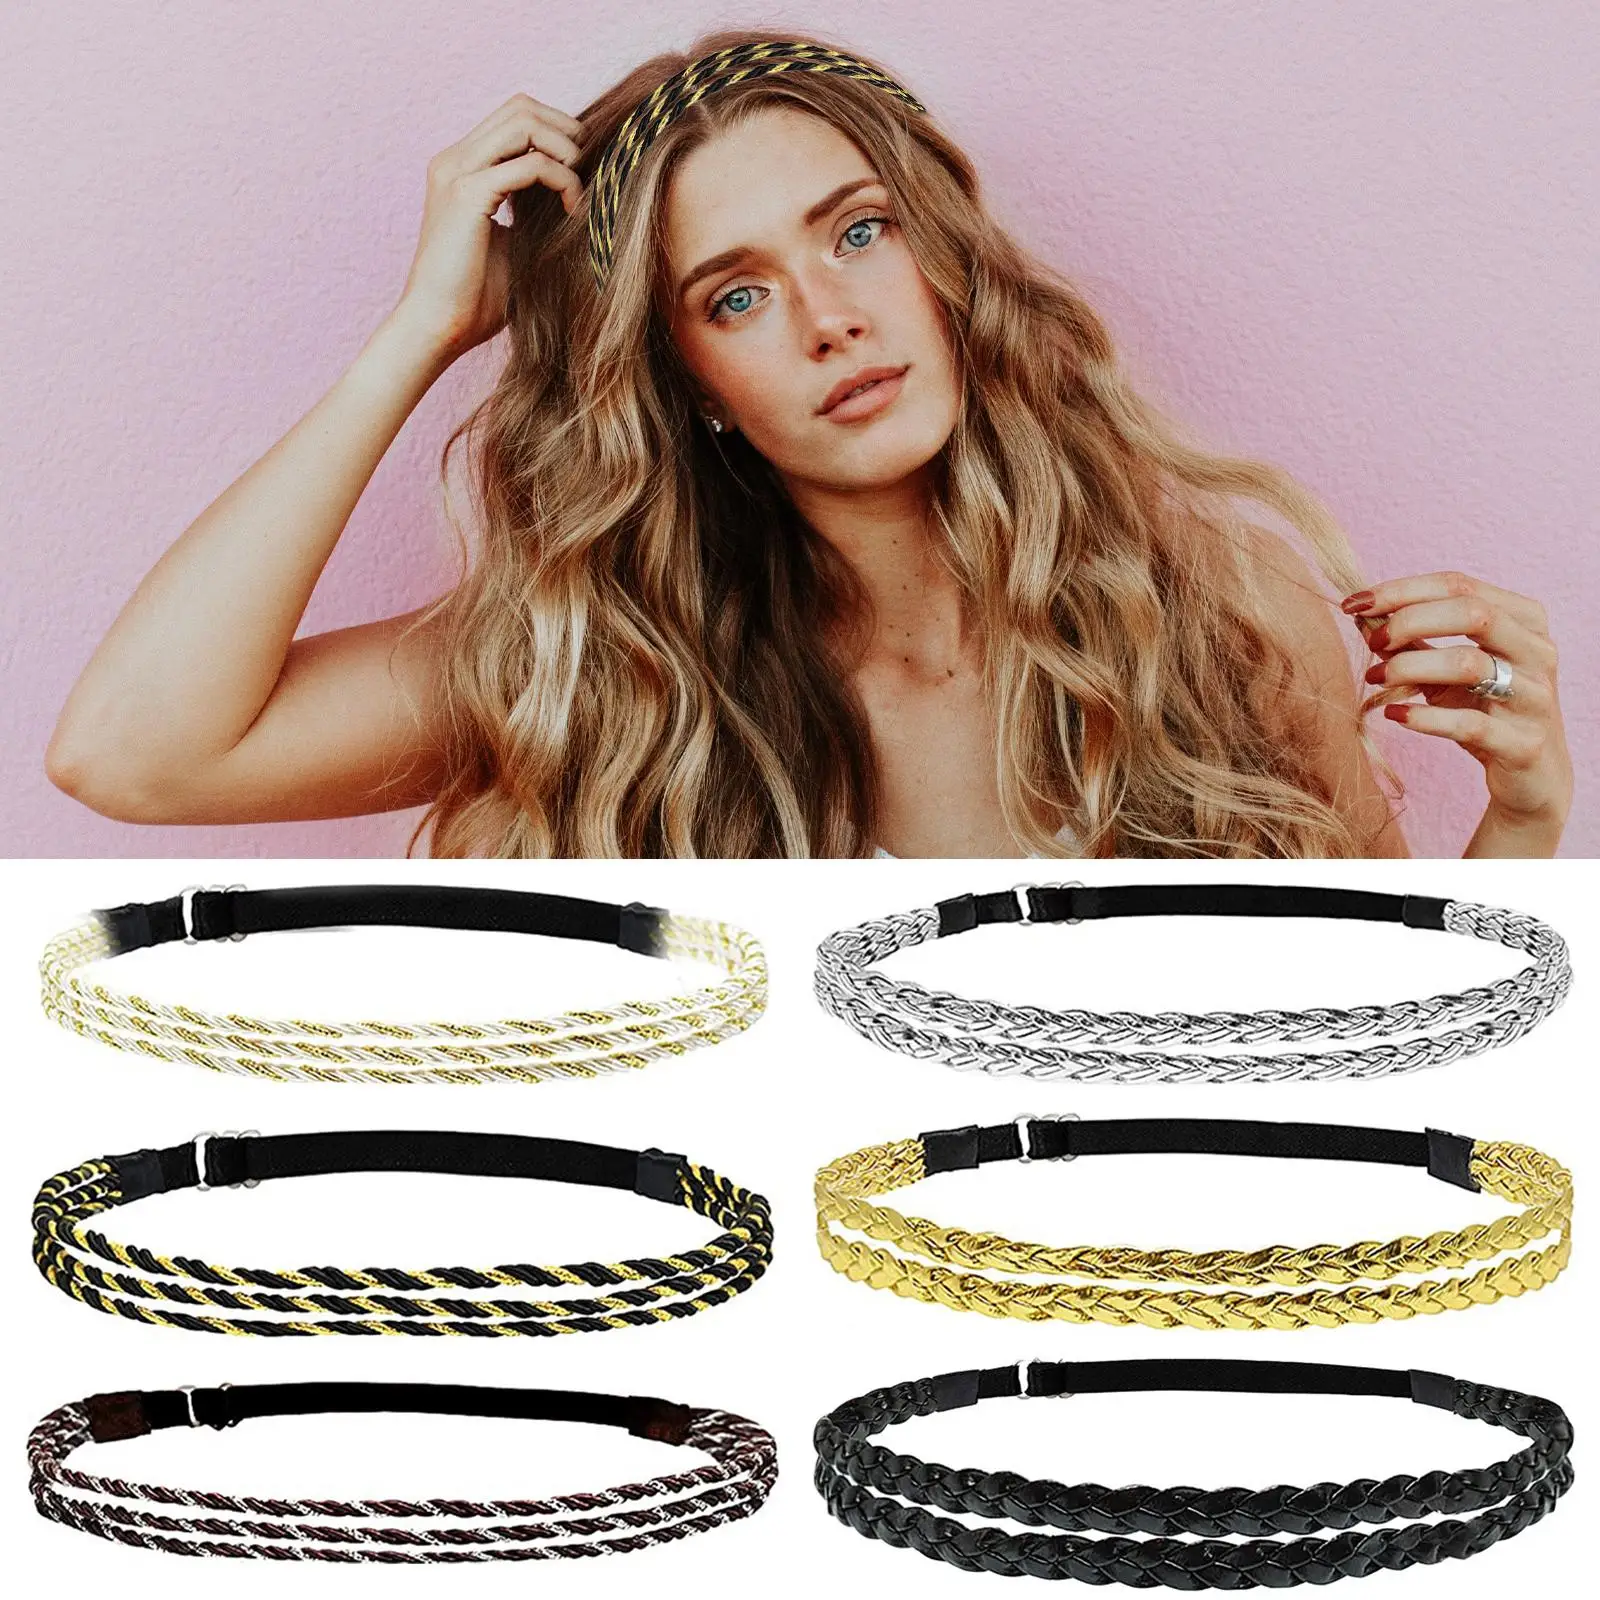 6x Braided Headbands with Double Braided and Triple Strand Hippie Hair Accessory Boho No Slip Hair Band for Girl Unisex Women